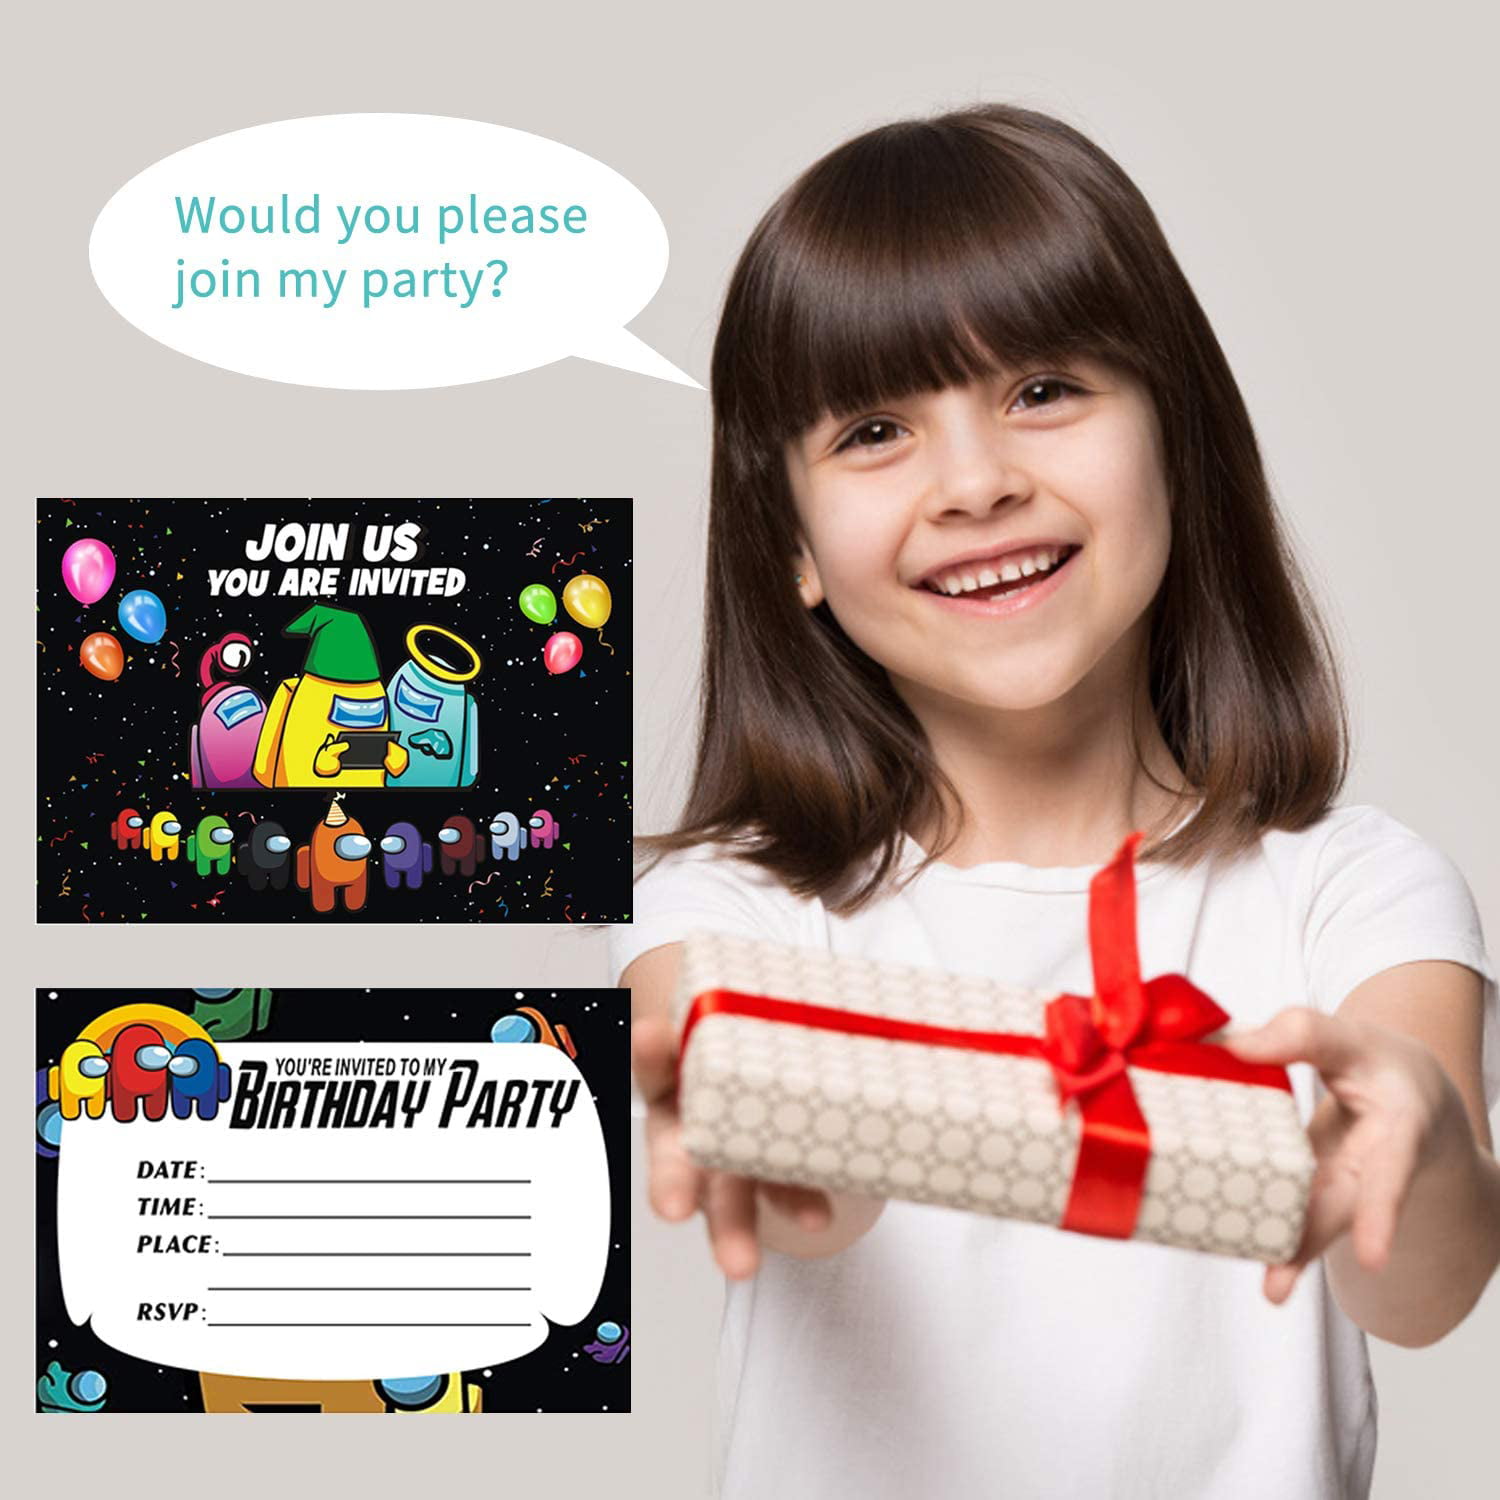 16 Invite Cards for Boys A-mong us Party Supplies Video Game Among Birthday Party Invitations 